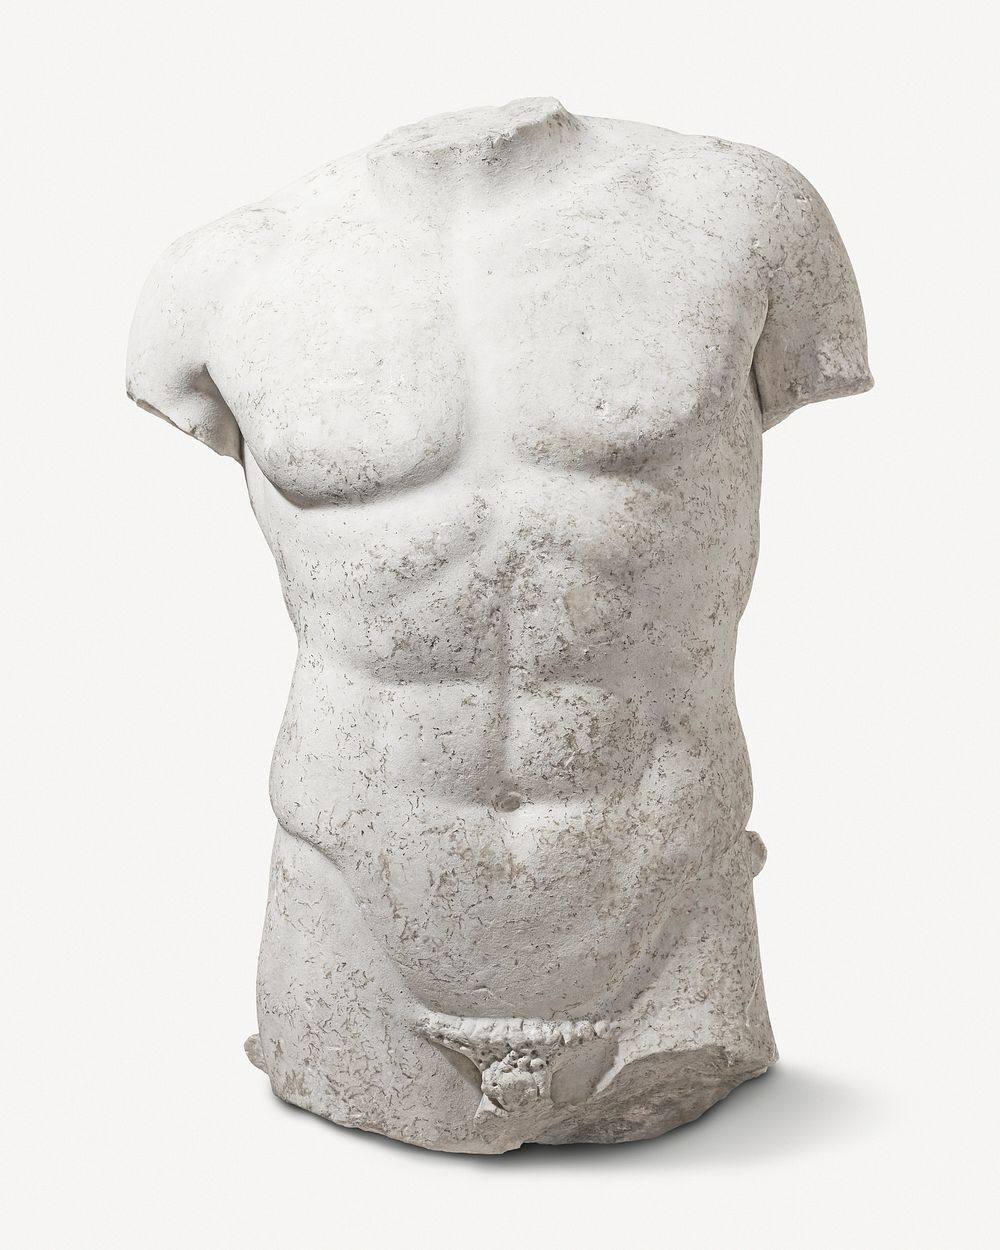 Aesthetic Torso sculpture psd.  Remastered by rawpixel